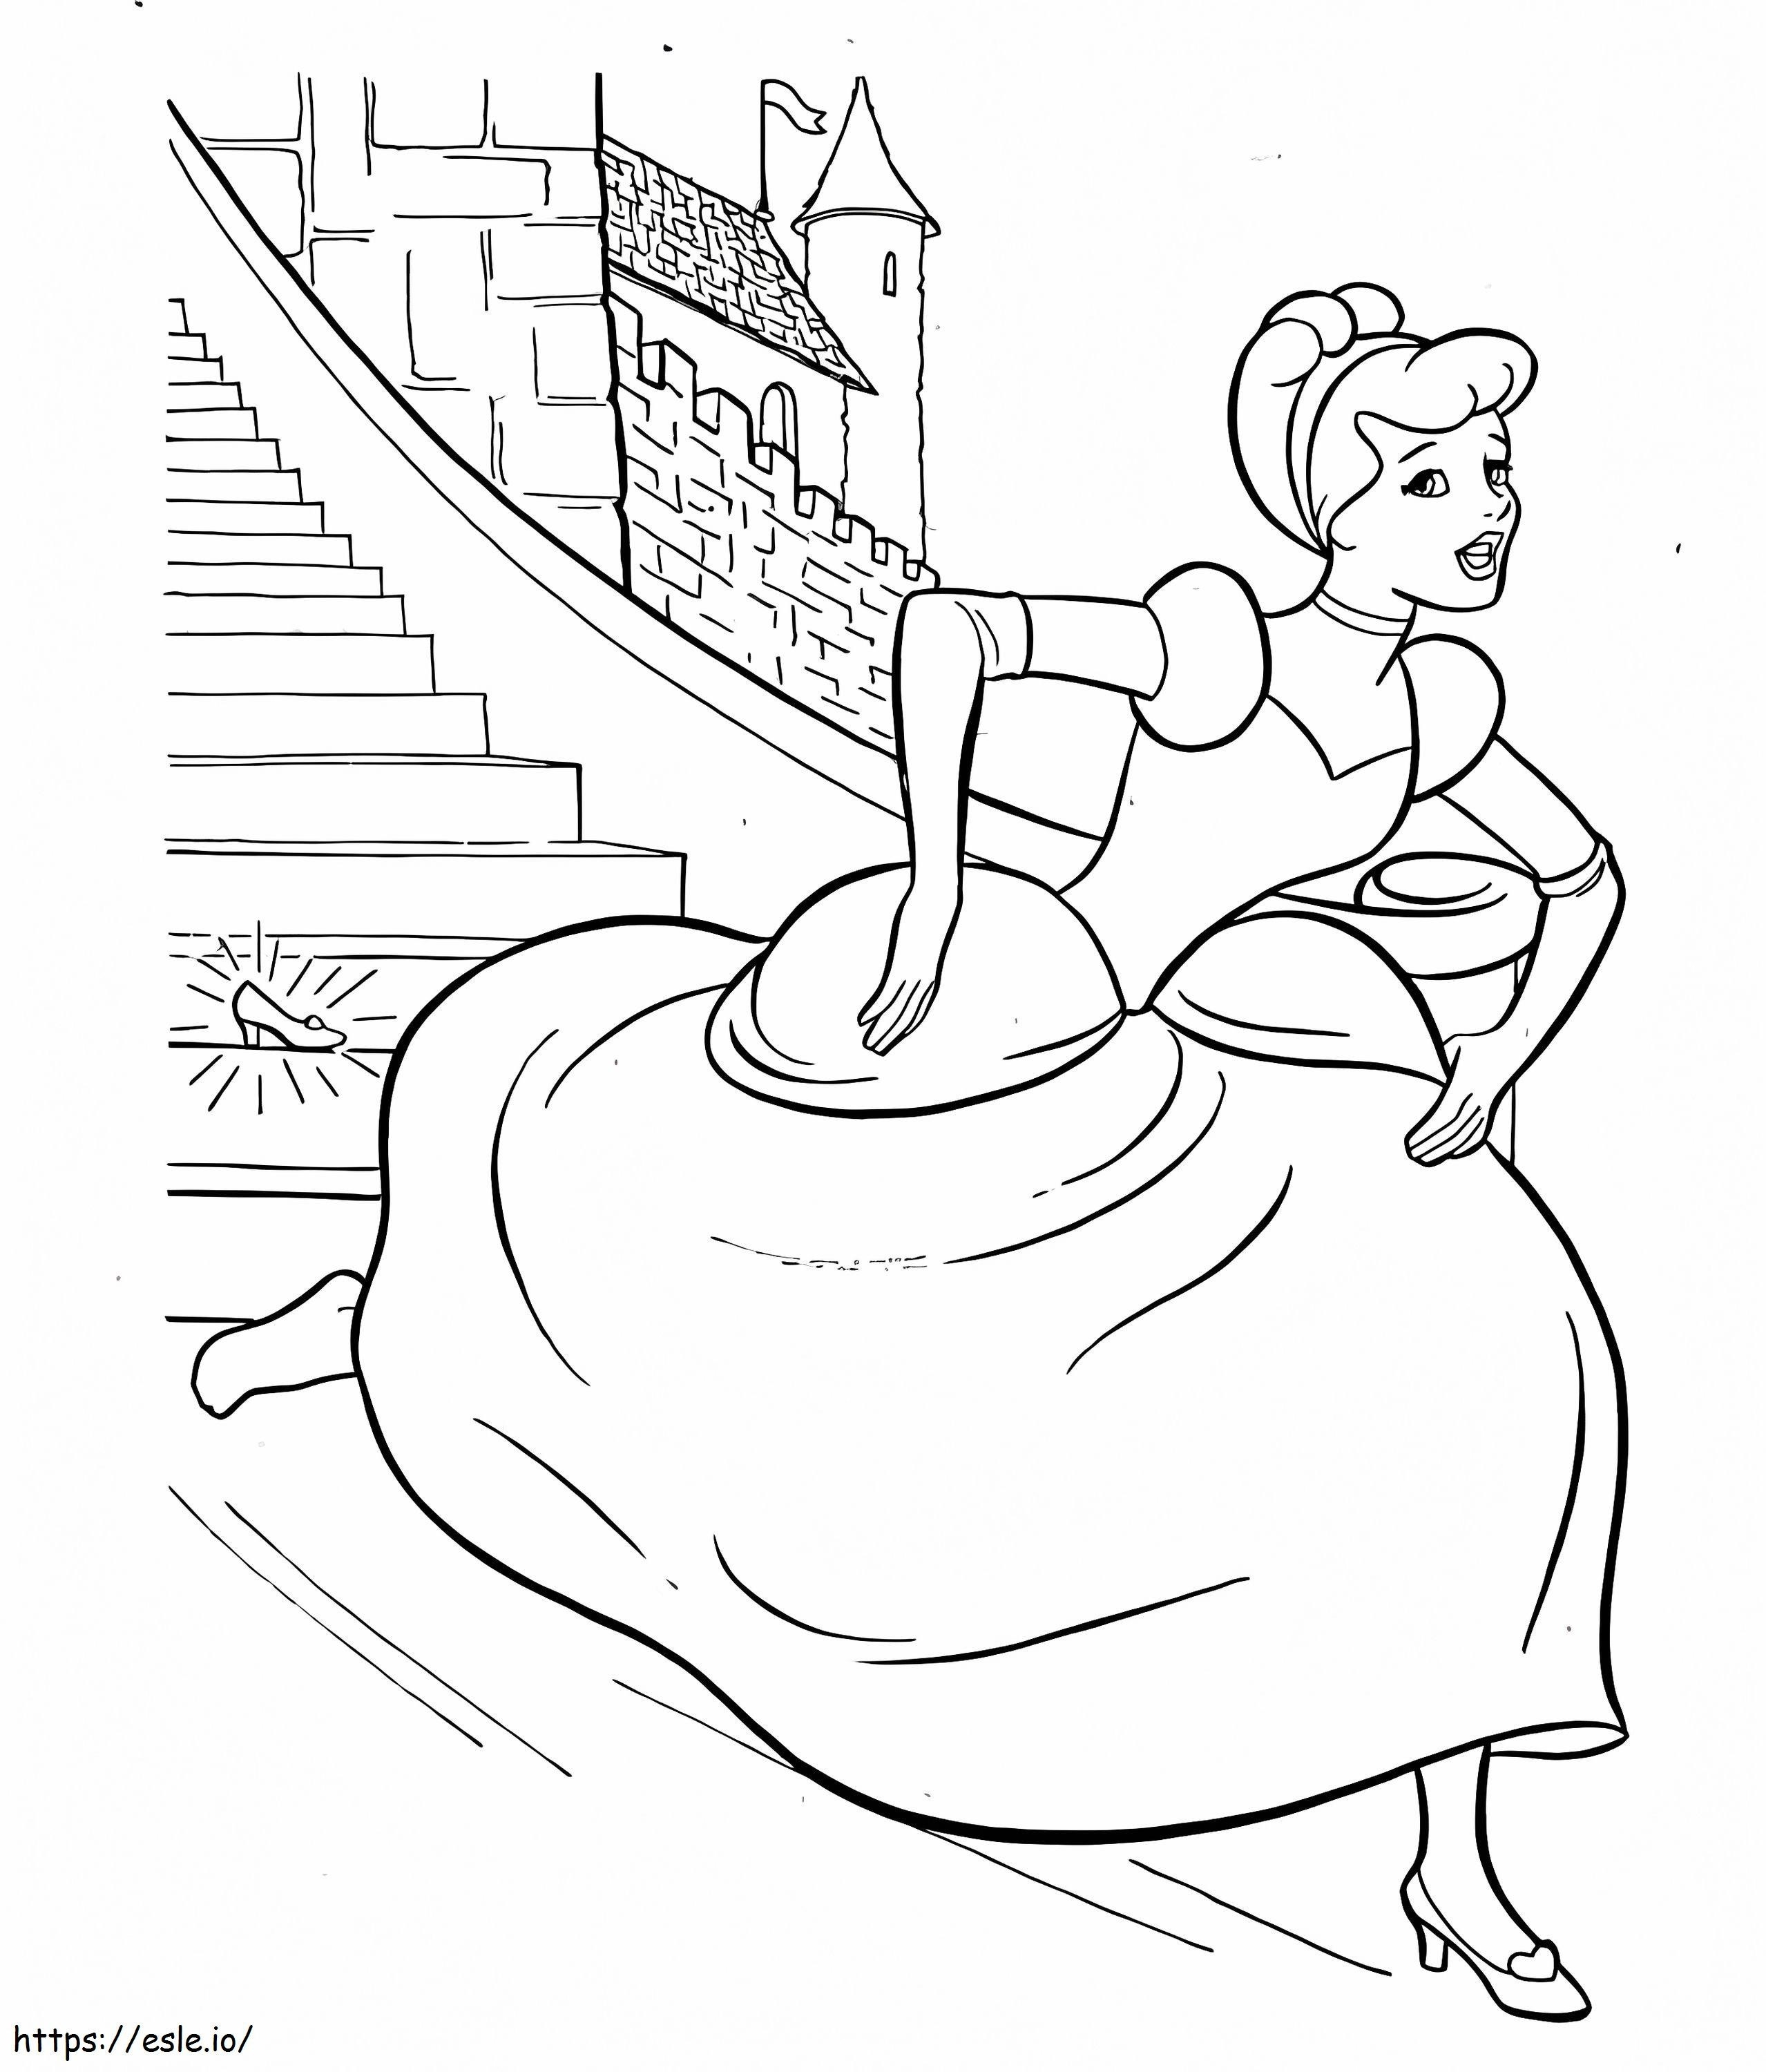 Cinderella Ran Out Of The Palace coloring page